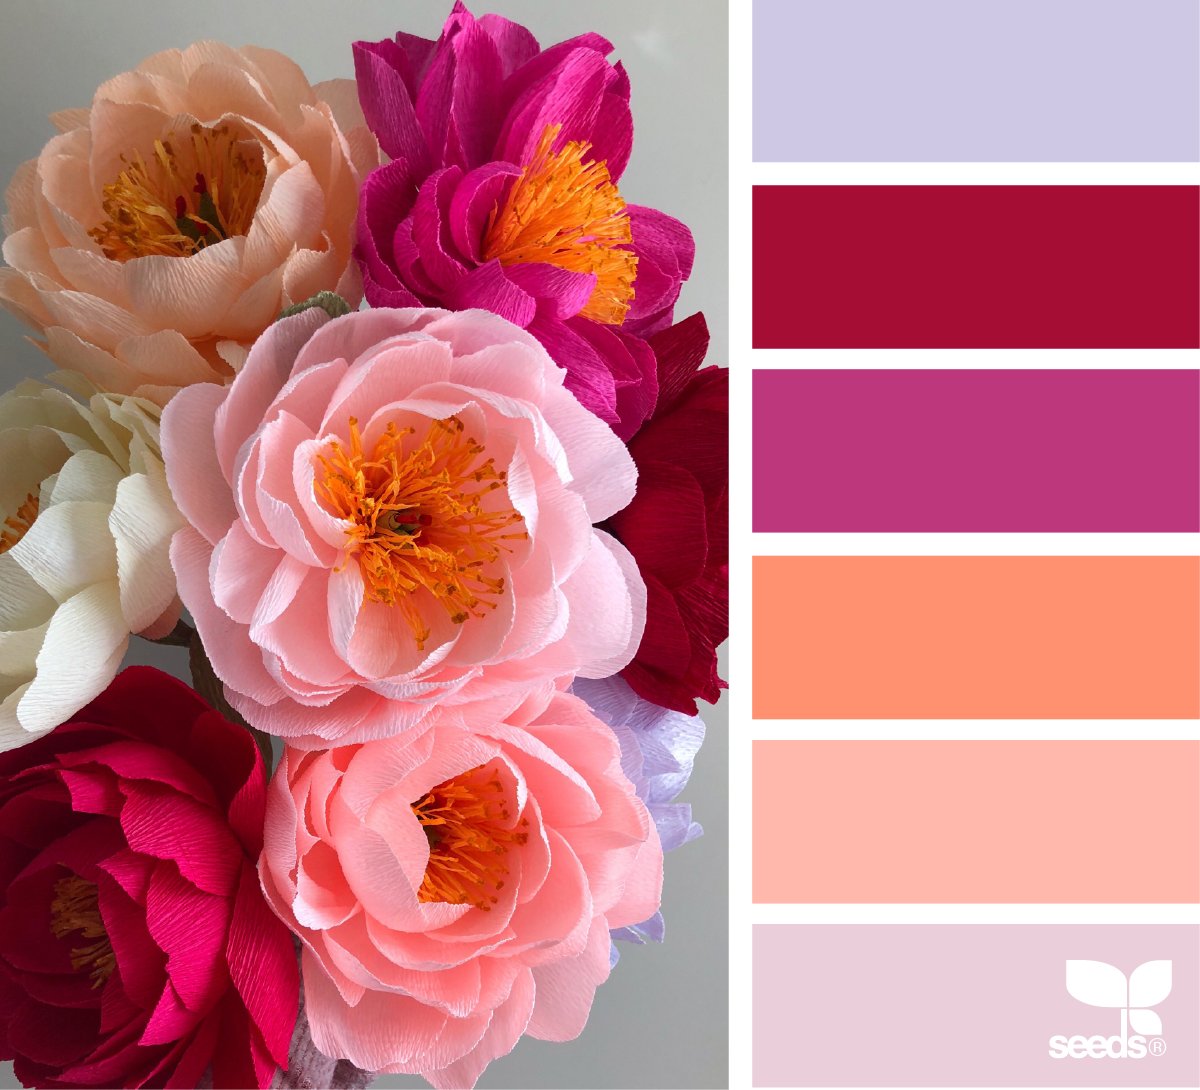 #beinspired #blogging #colors #colorpalettes #decoratingideas More: bit.ly/2EfrgZo